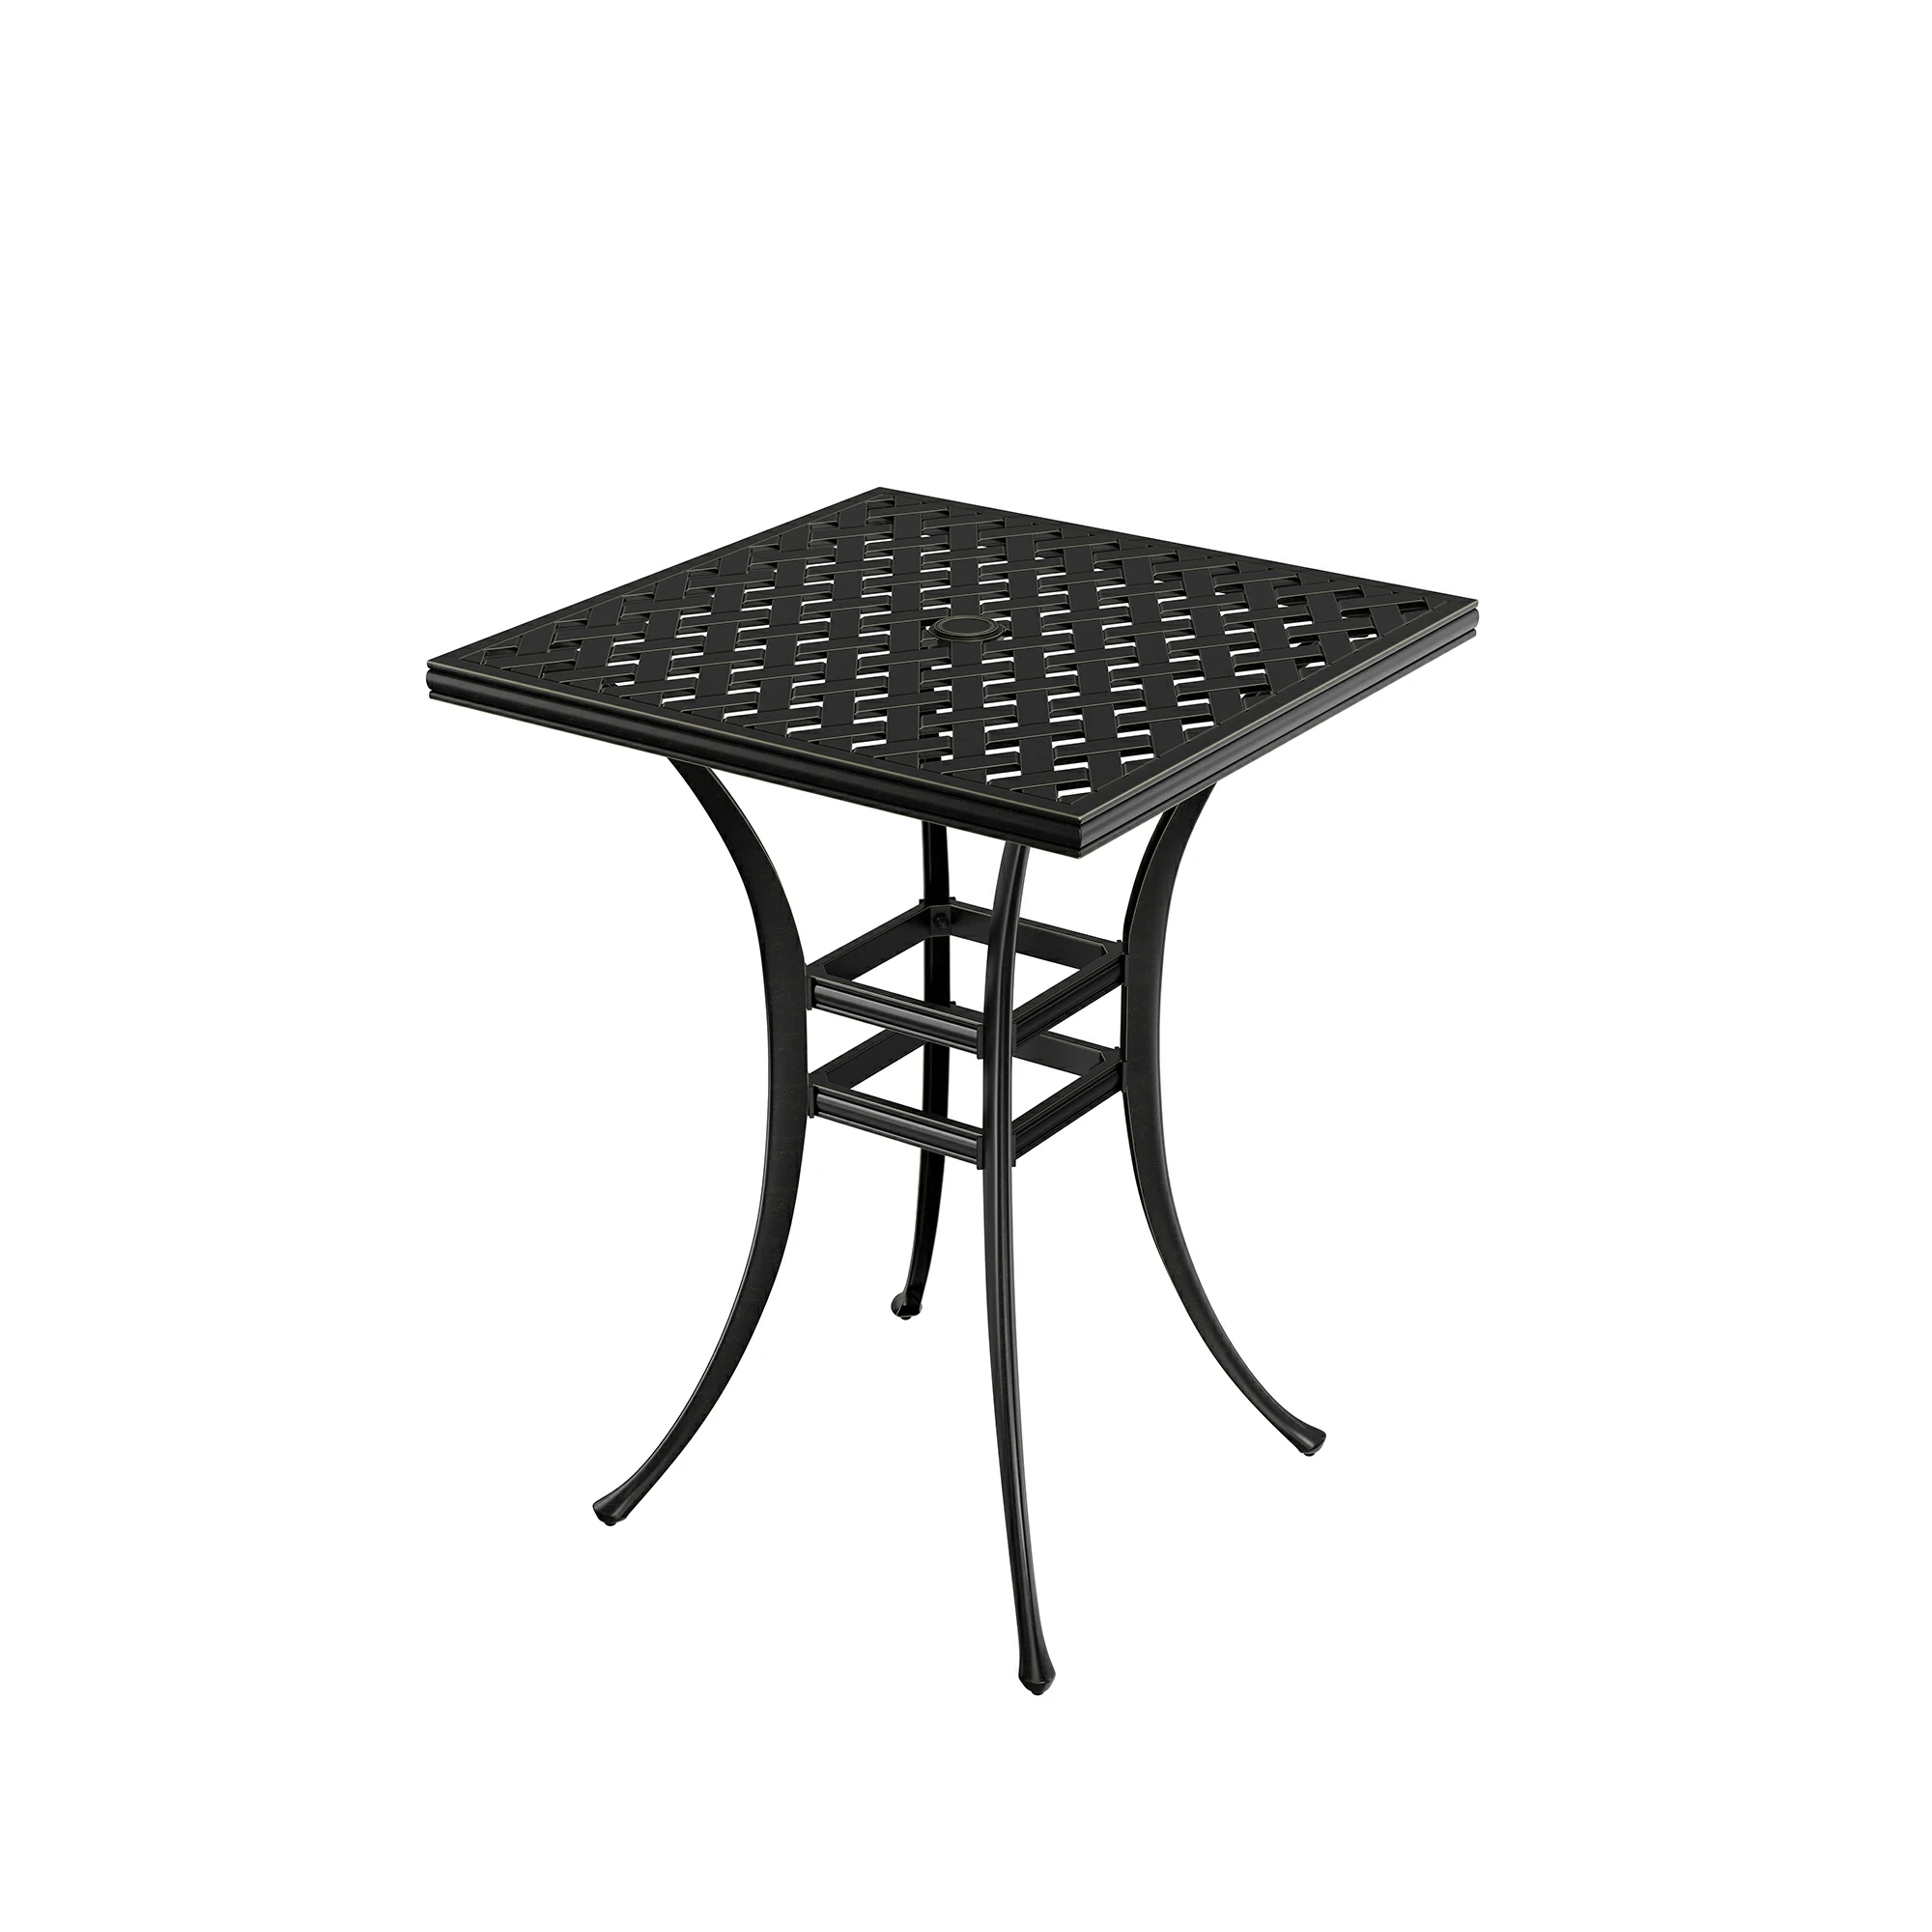 Square Outdoor Table Bar Stool 29-in W x 29-in L with Umbrella Hole